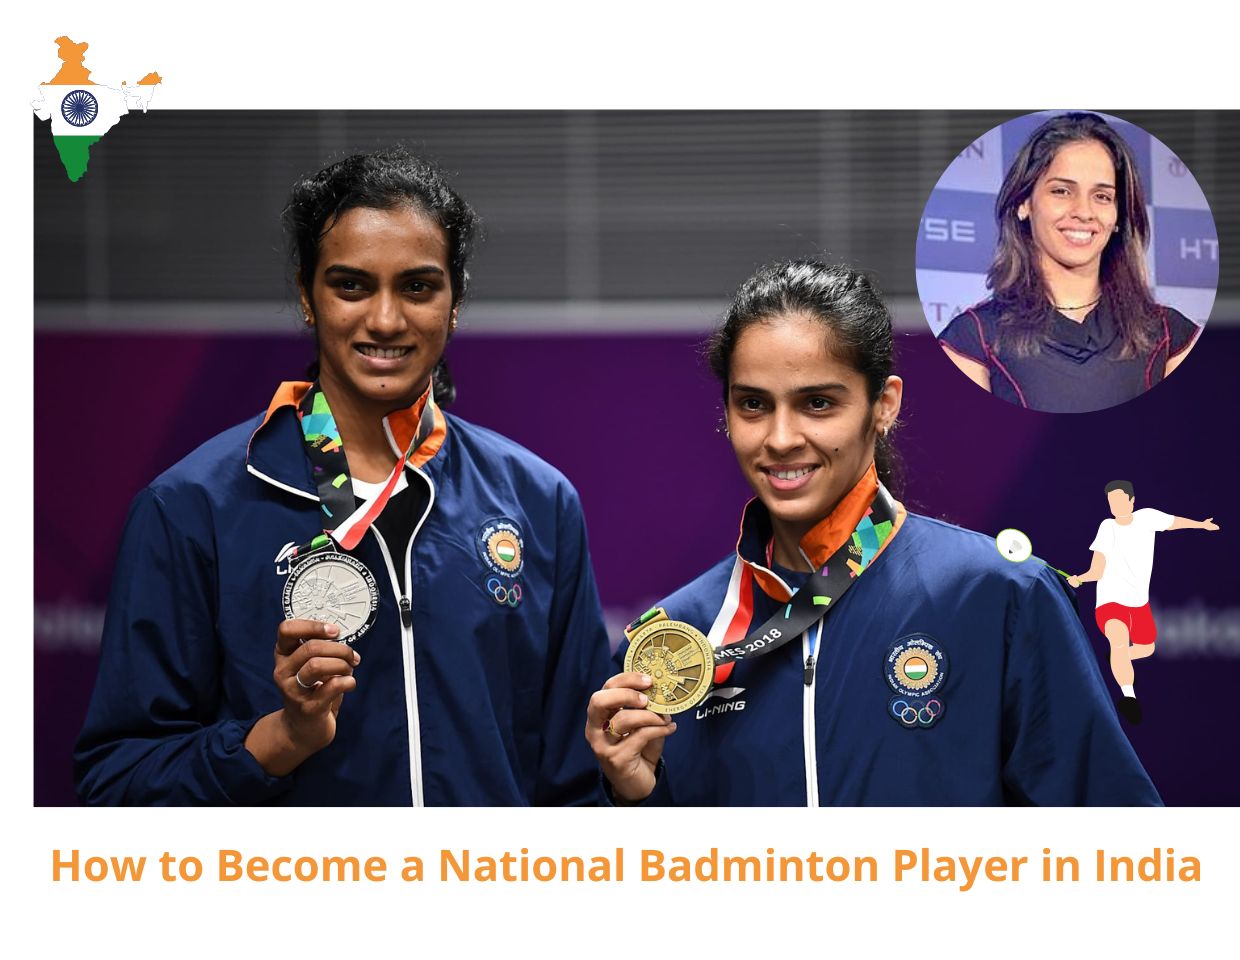 National Badminton Player in India